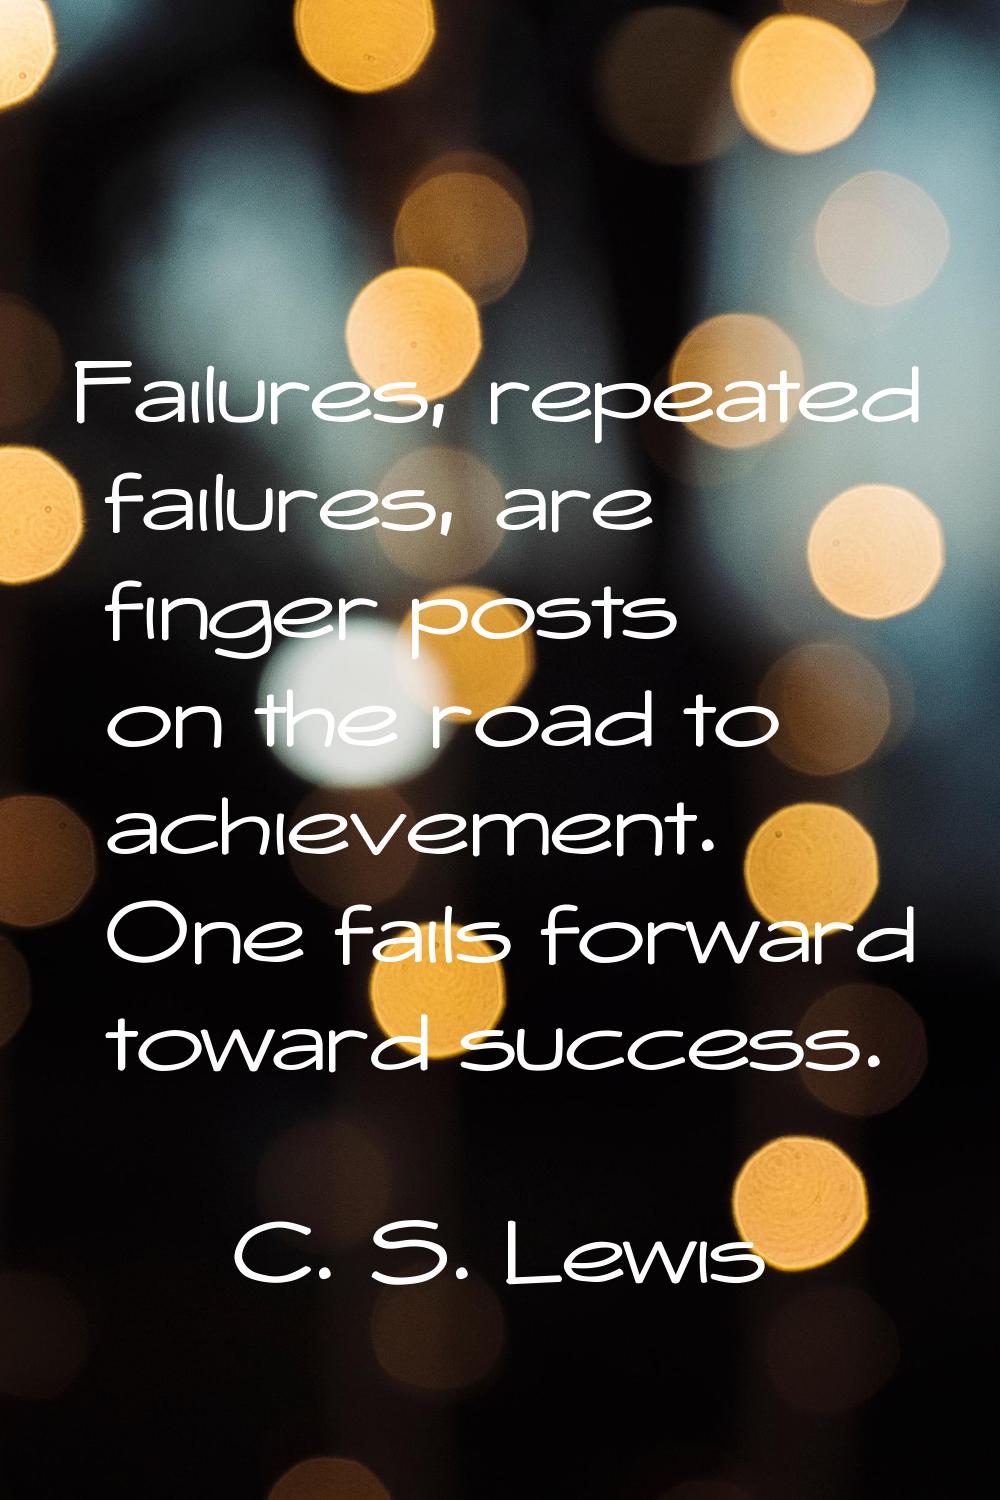 Failures, repeated failures, are finger posts on the road to achievement. One fails forward toward 